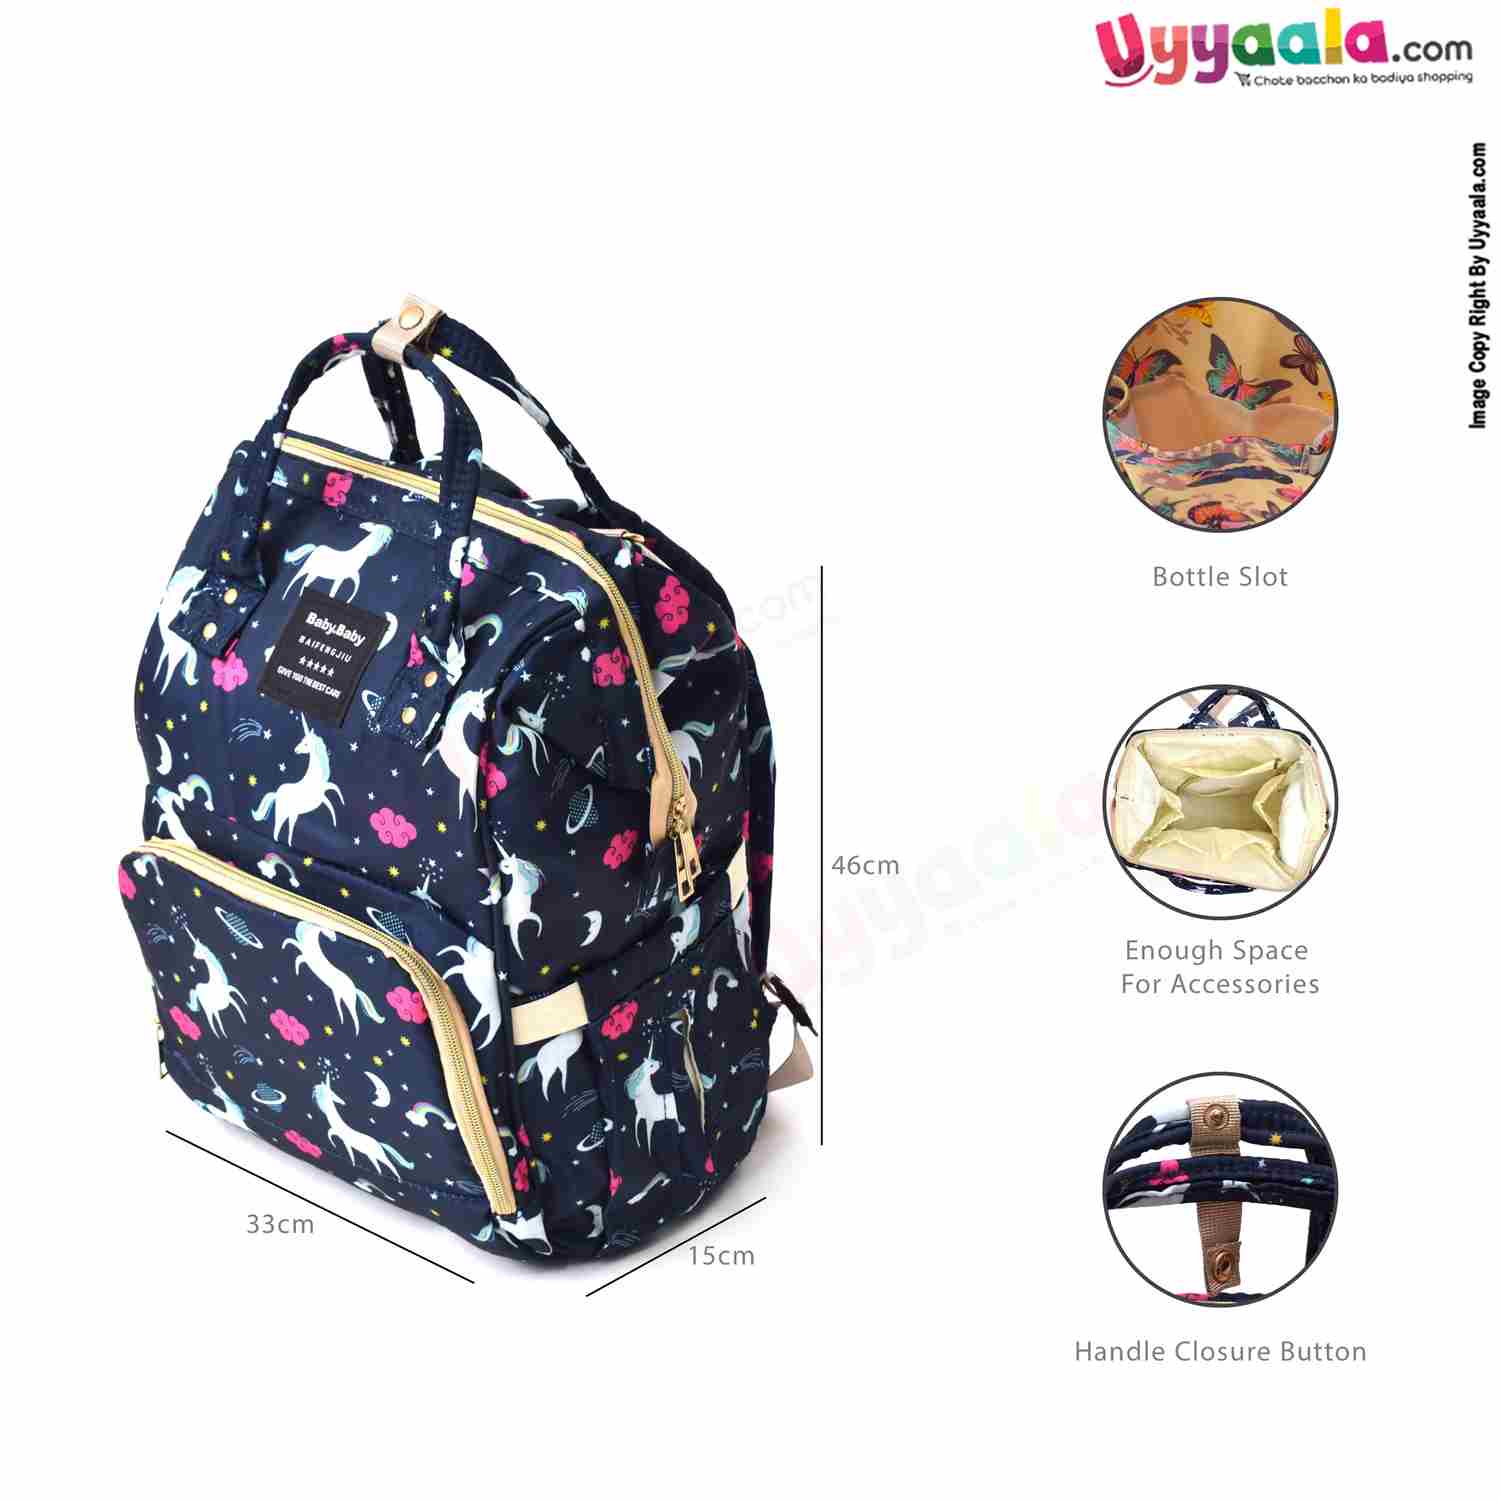 Mother's back pack (diaper bag) comfortable for travelling mothers, premium quality - size(46*31cm) - navy blue